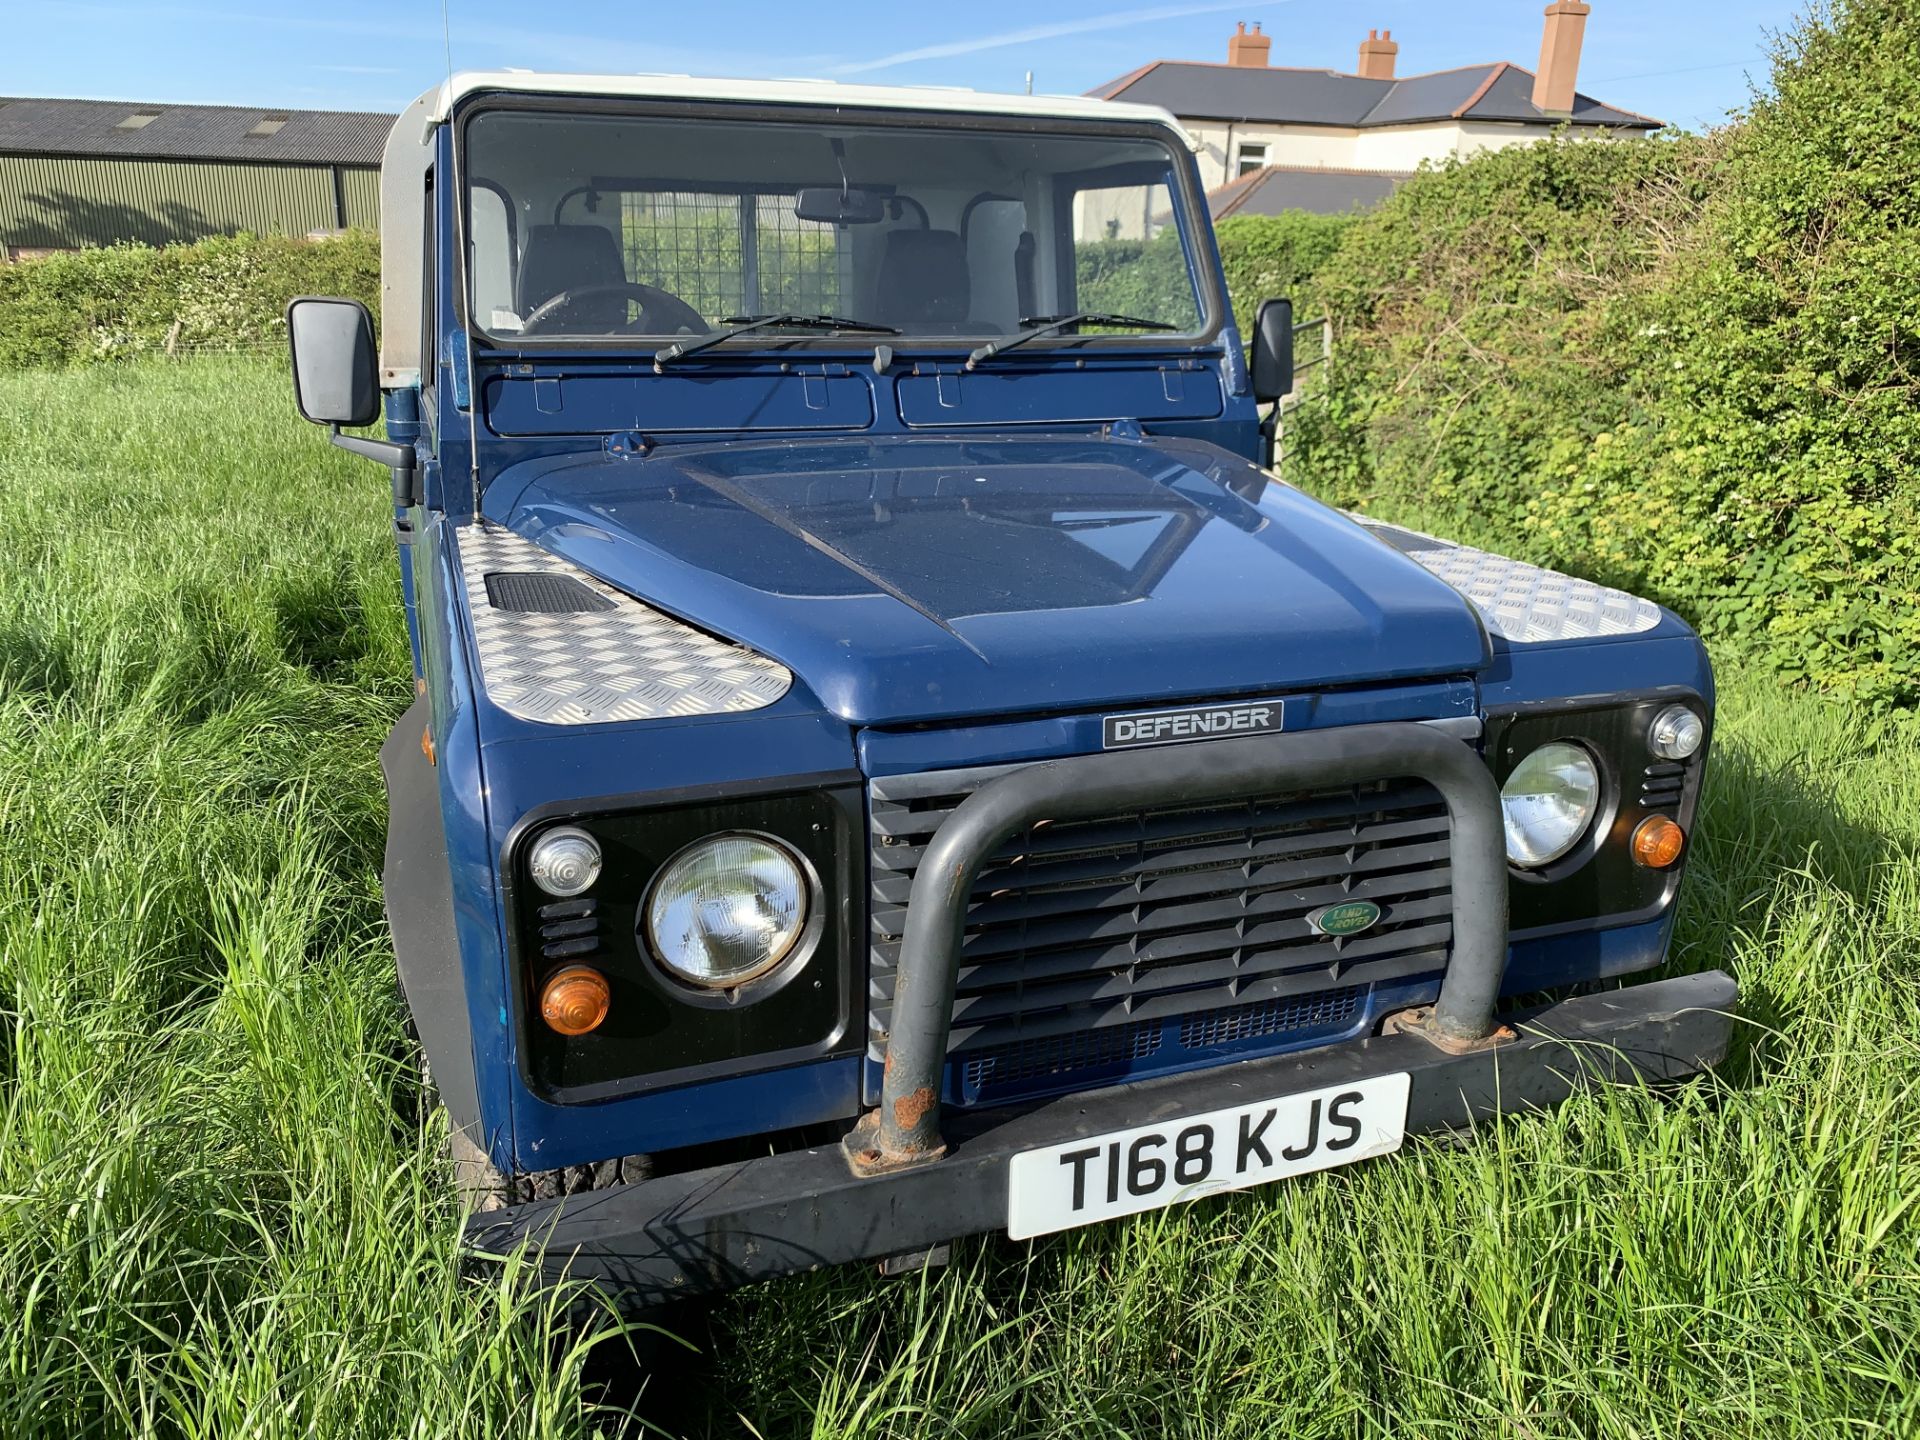 110 Land Rover TD5 high capacity - Image 2 of 9